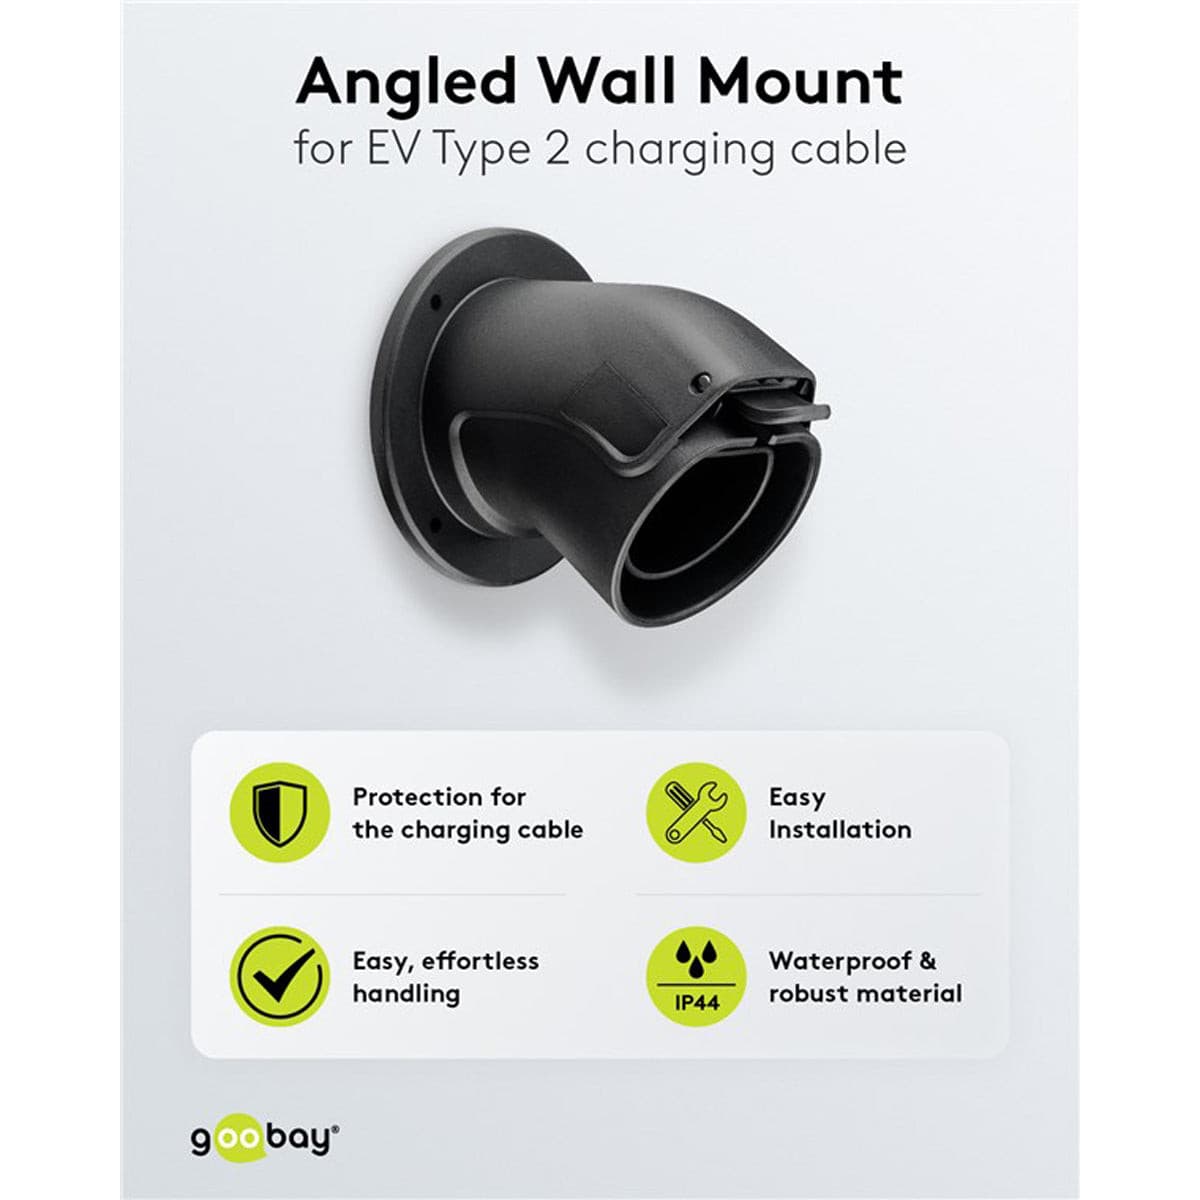 Goobay Angled Wall Mount for EV Type 2 Charging Cable - Black.